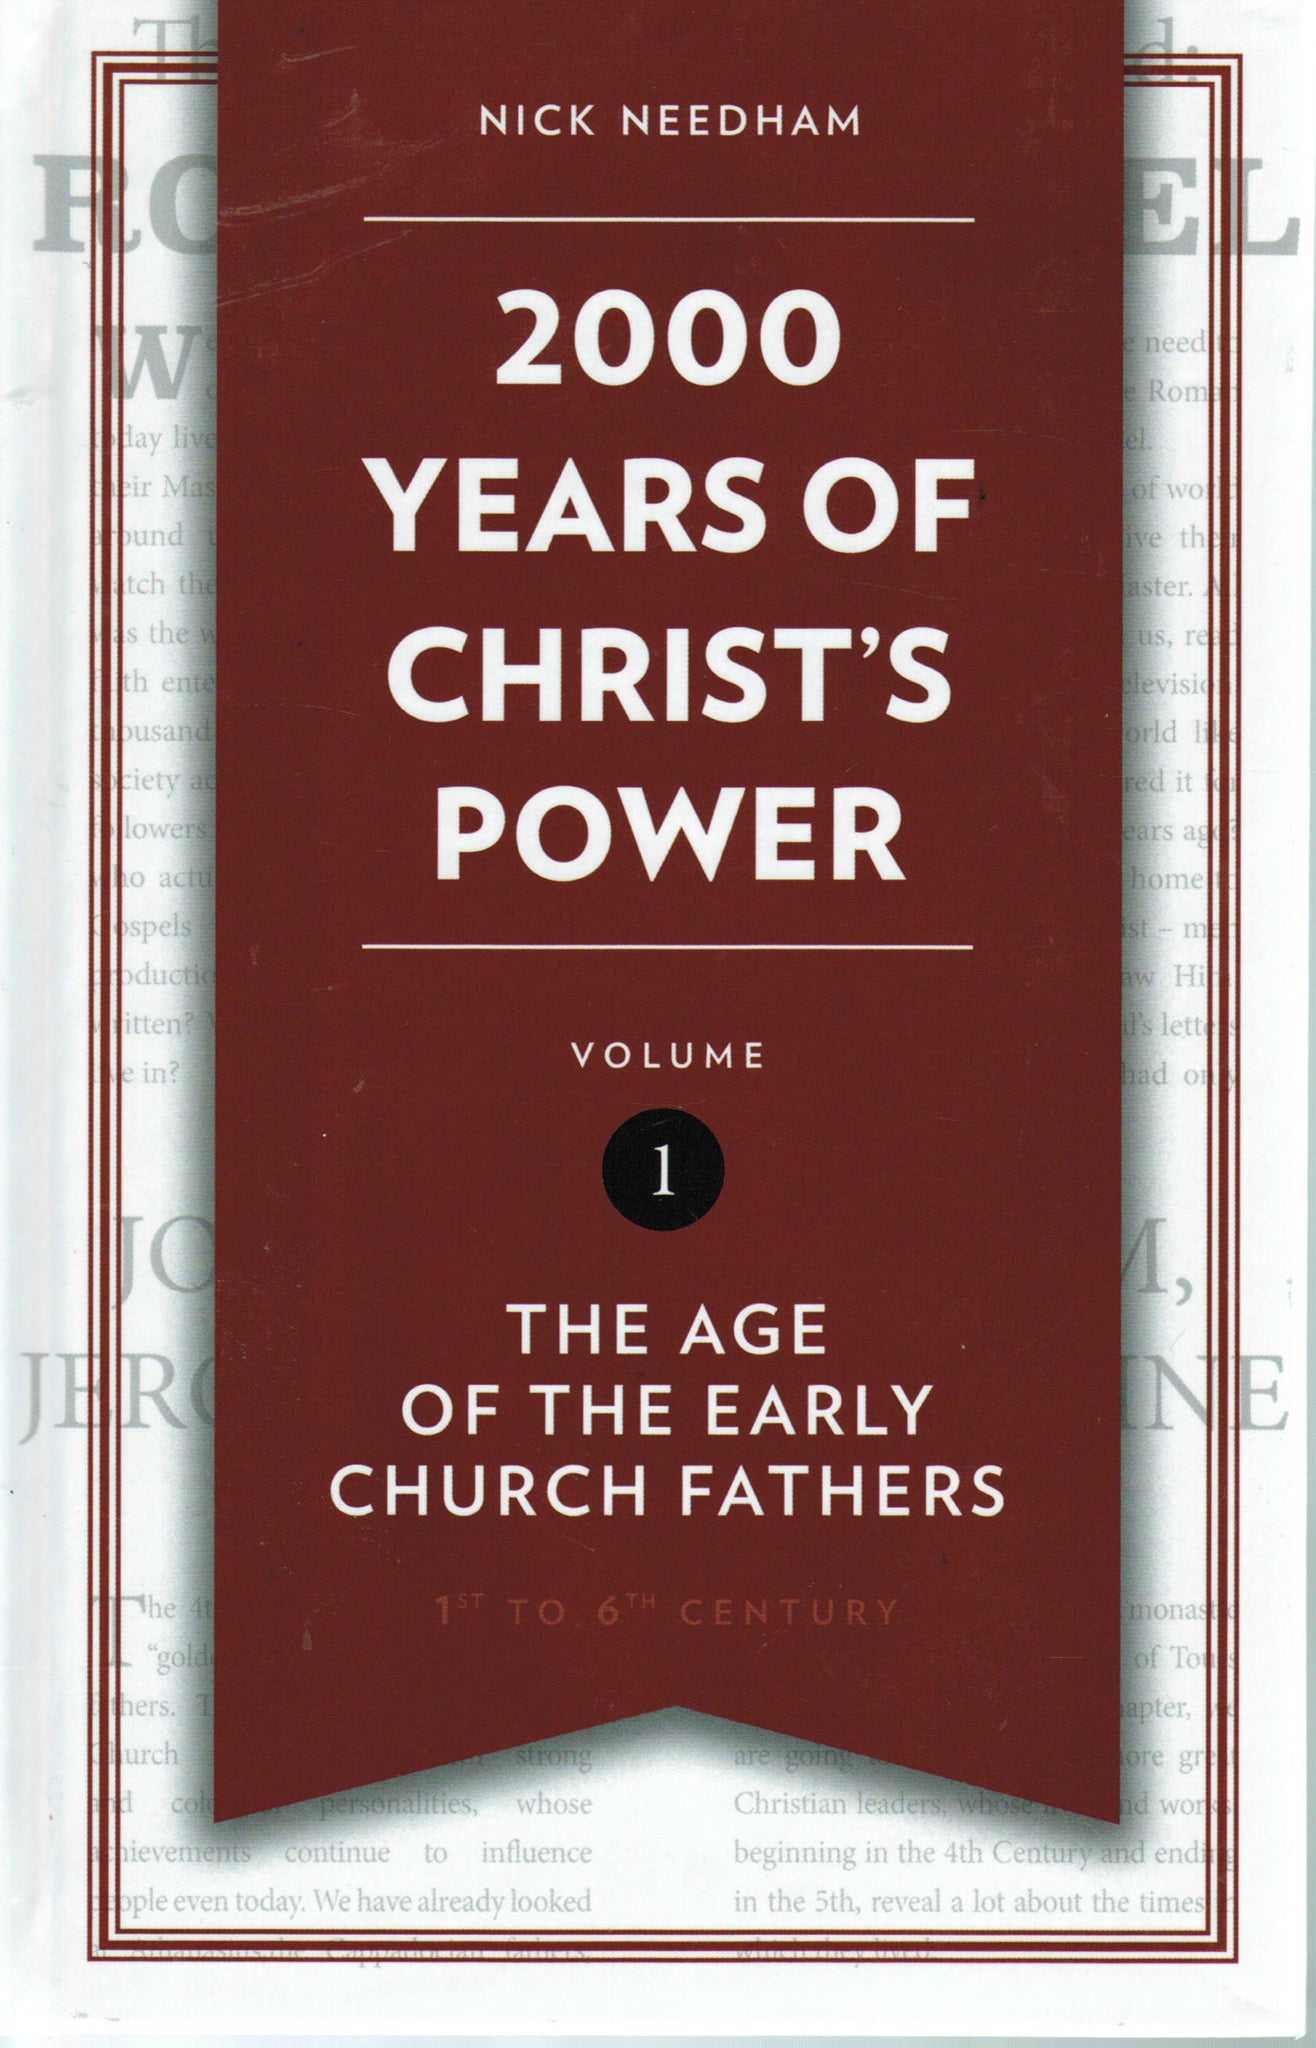 2000 Years of Christ's Power - Volume 1: The Age of the Early Church Fathers [1st to 6th Century]